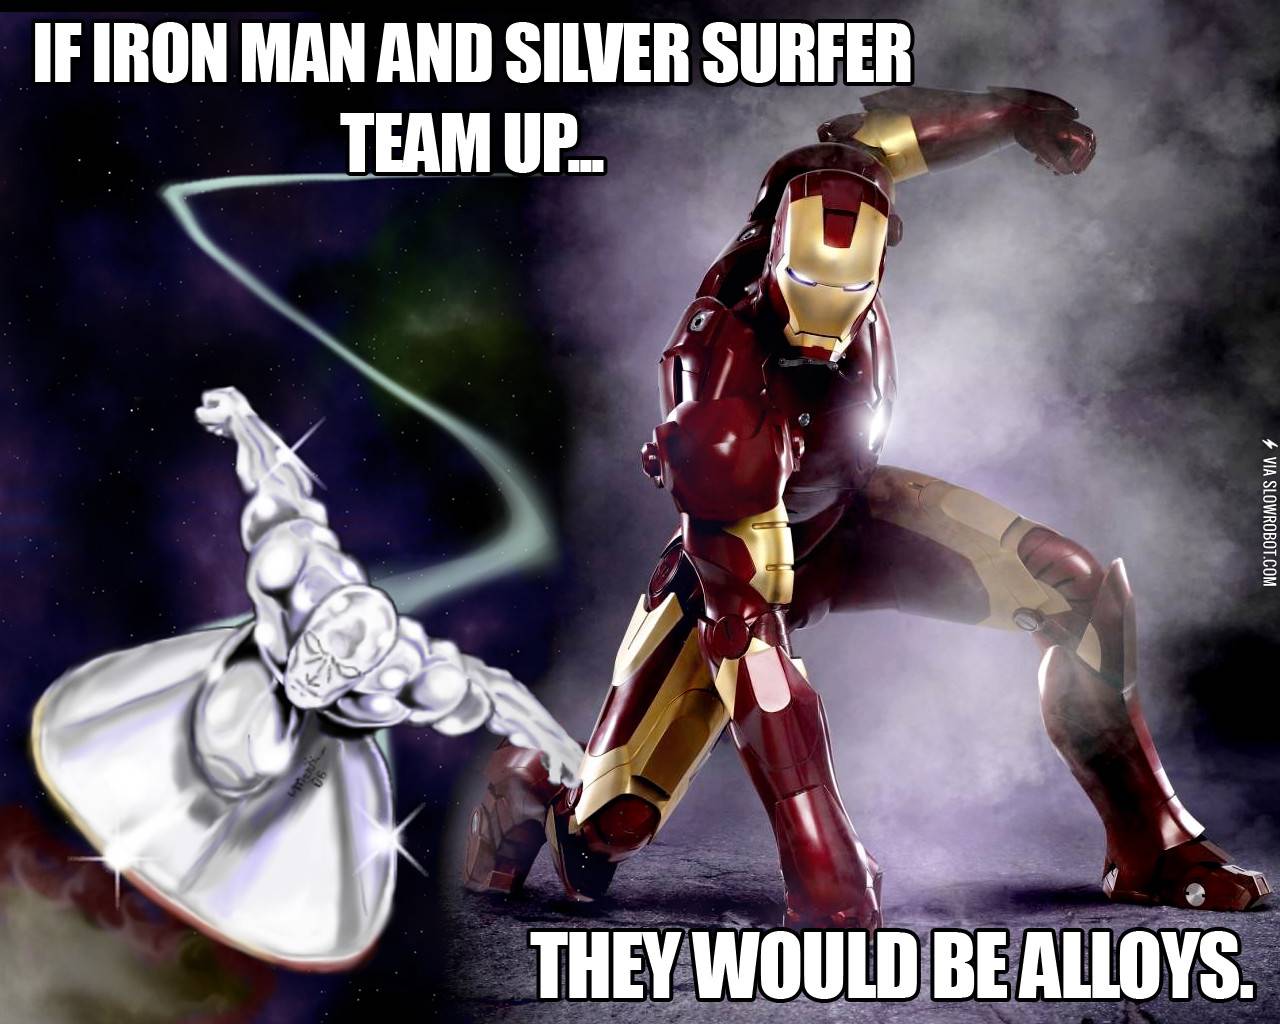 If+Iron+Man+and+Silver+Surfer+team+up%26%238230%3B